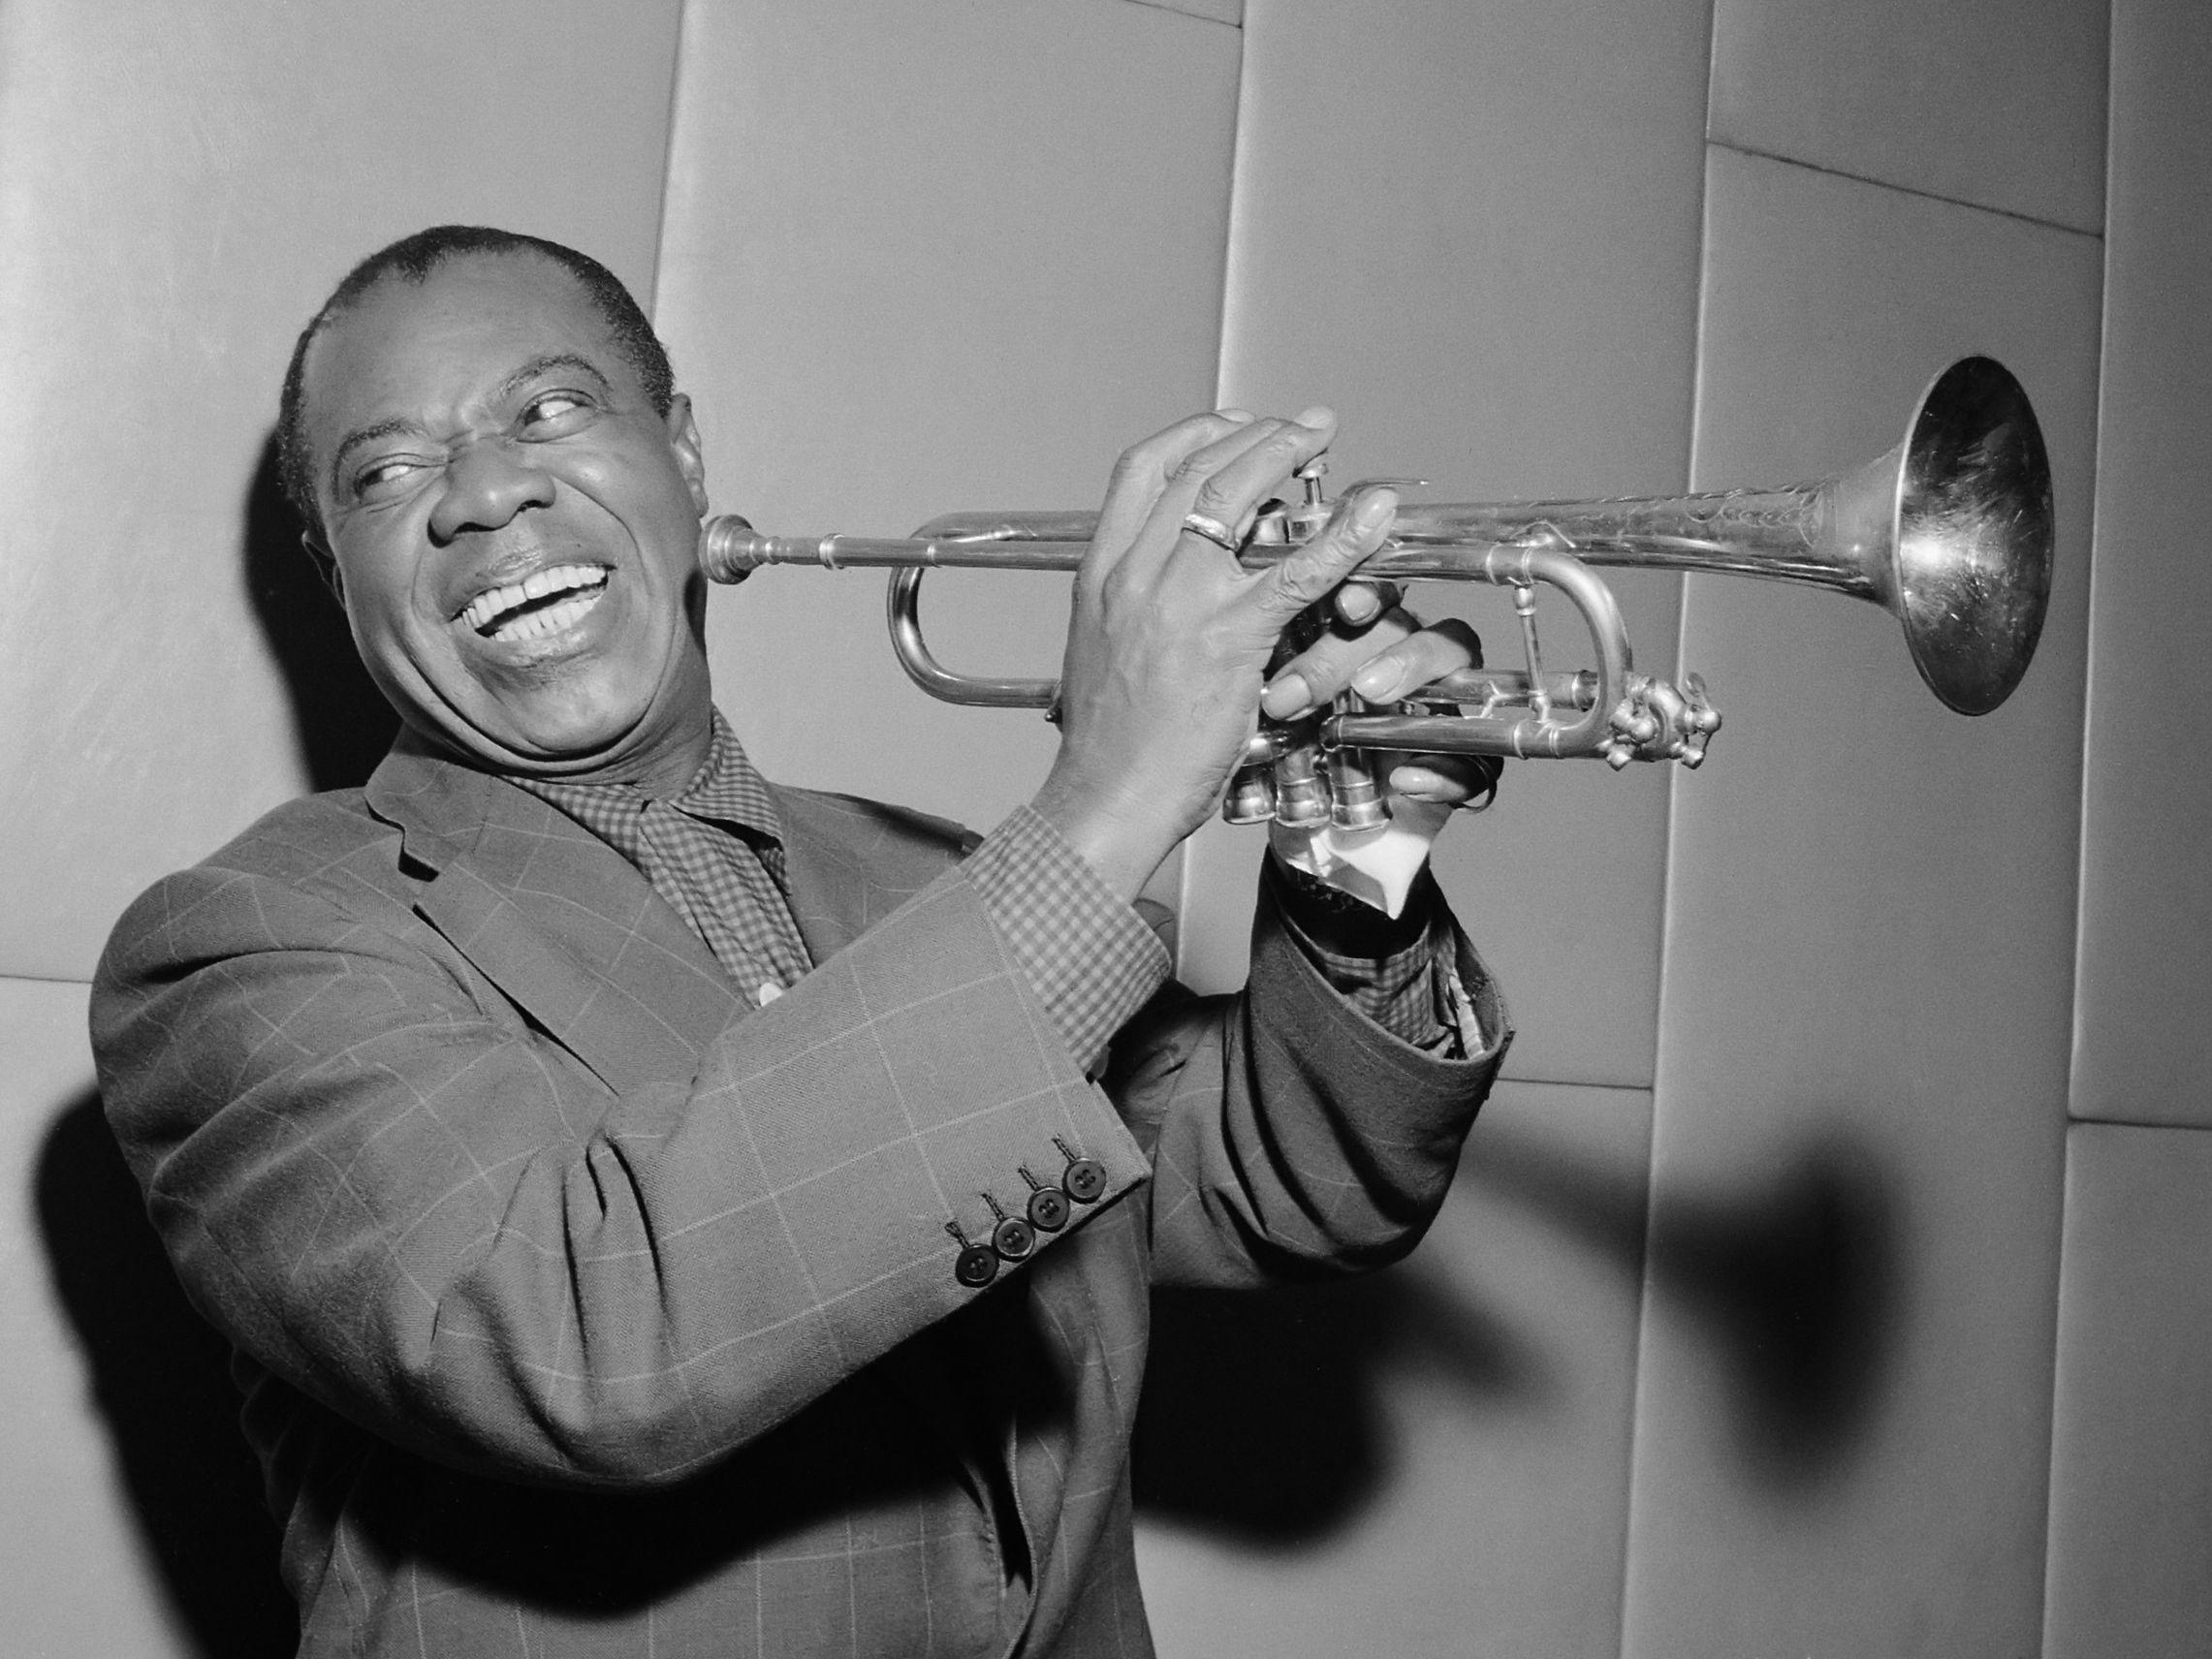 Louis laughing and playing his trumpet in 1955. Satchmo